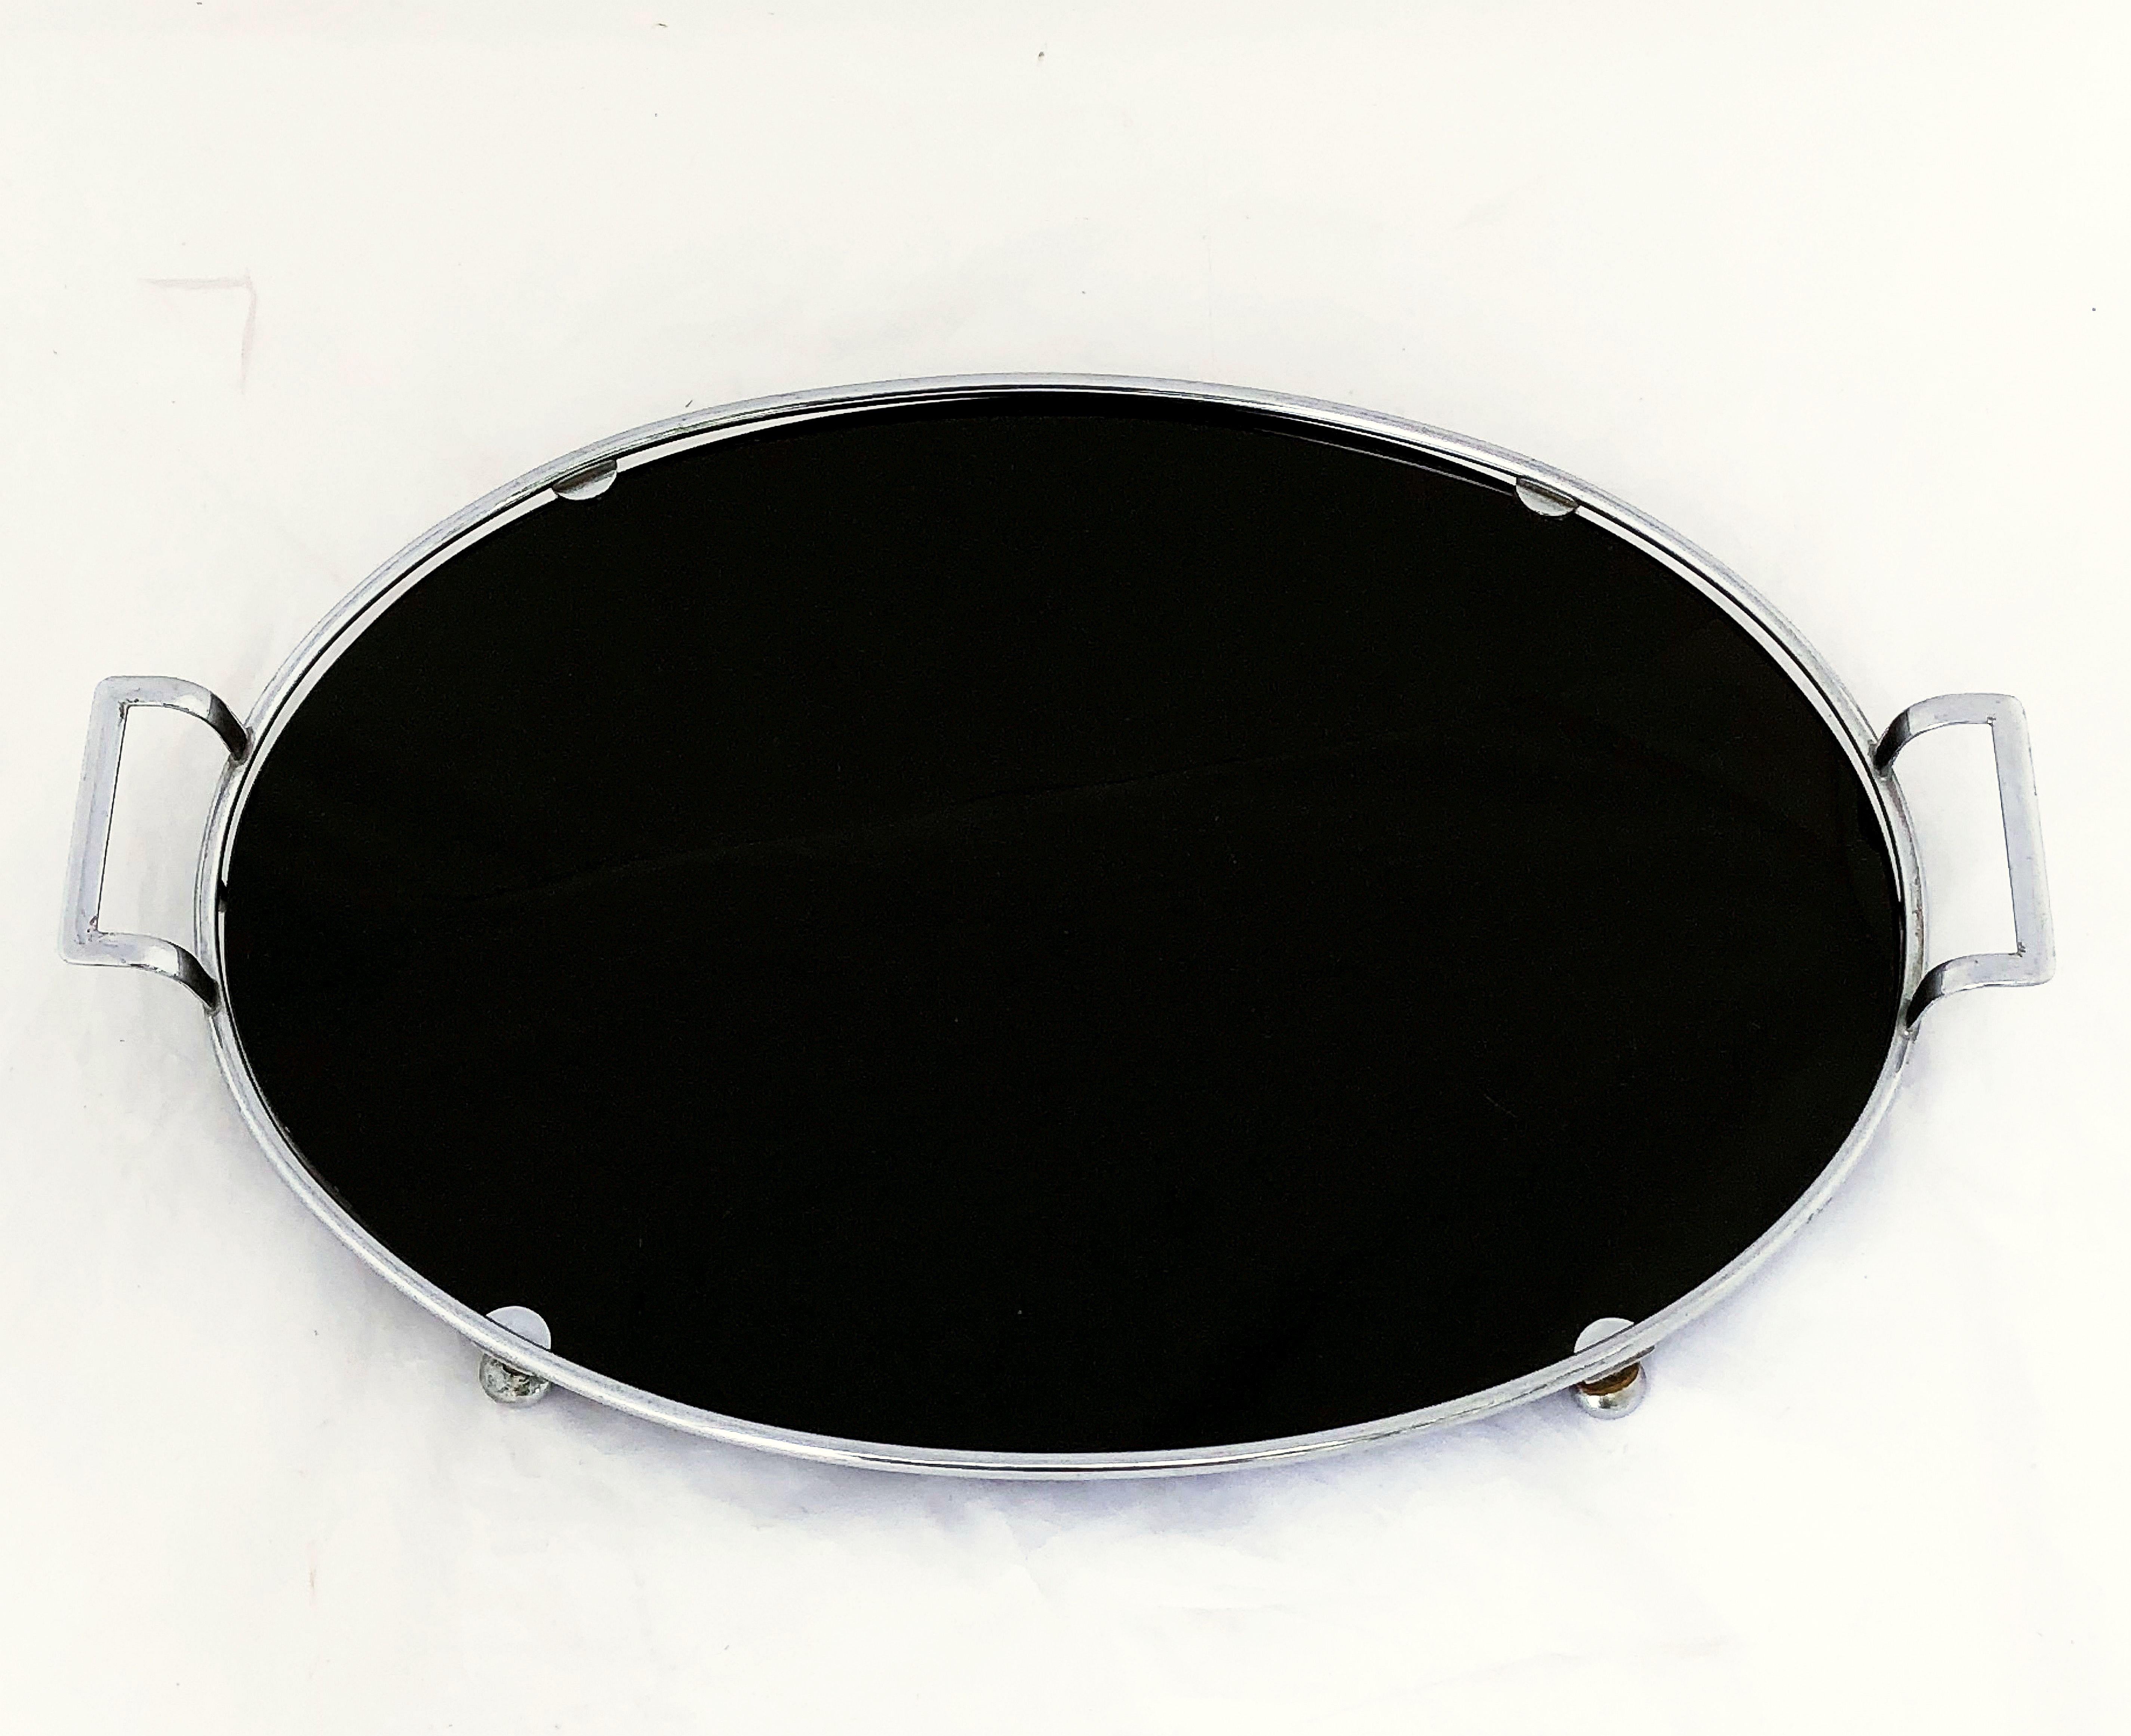 English Oval Serving Tray of Black Glass and Chrome from the Art Deco Period 1